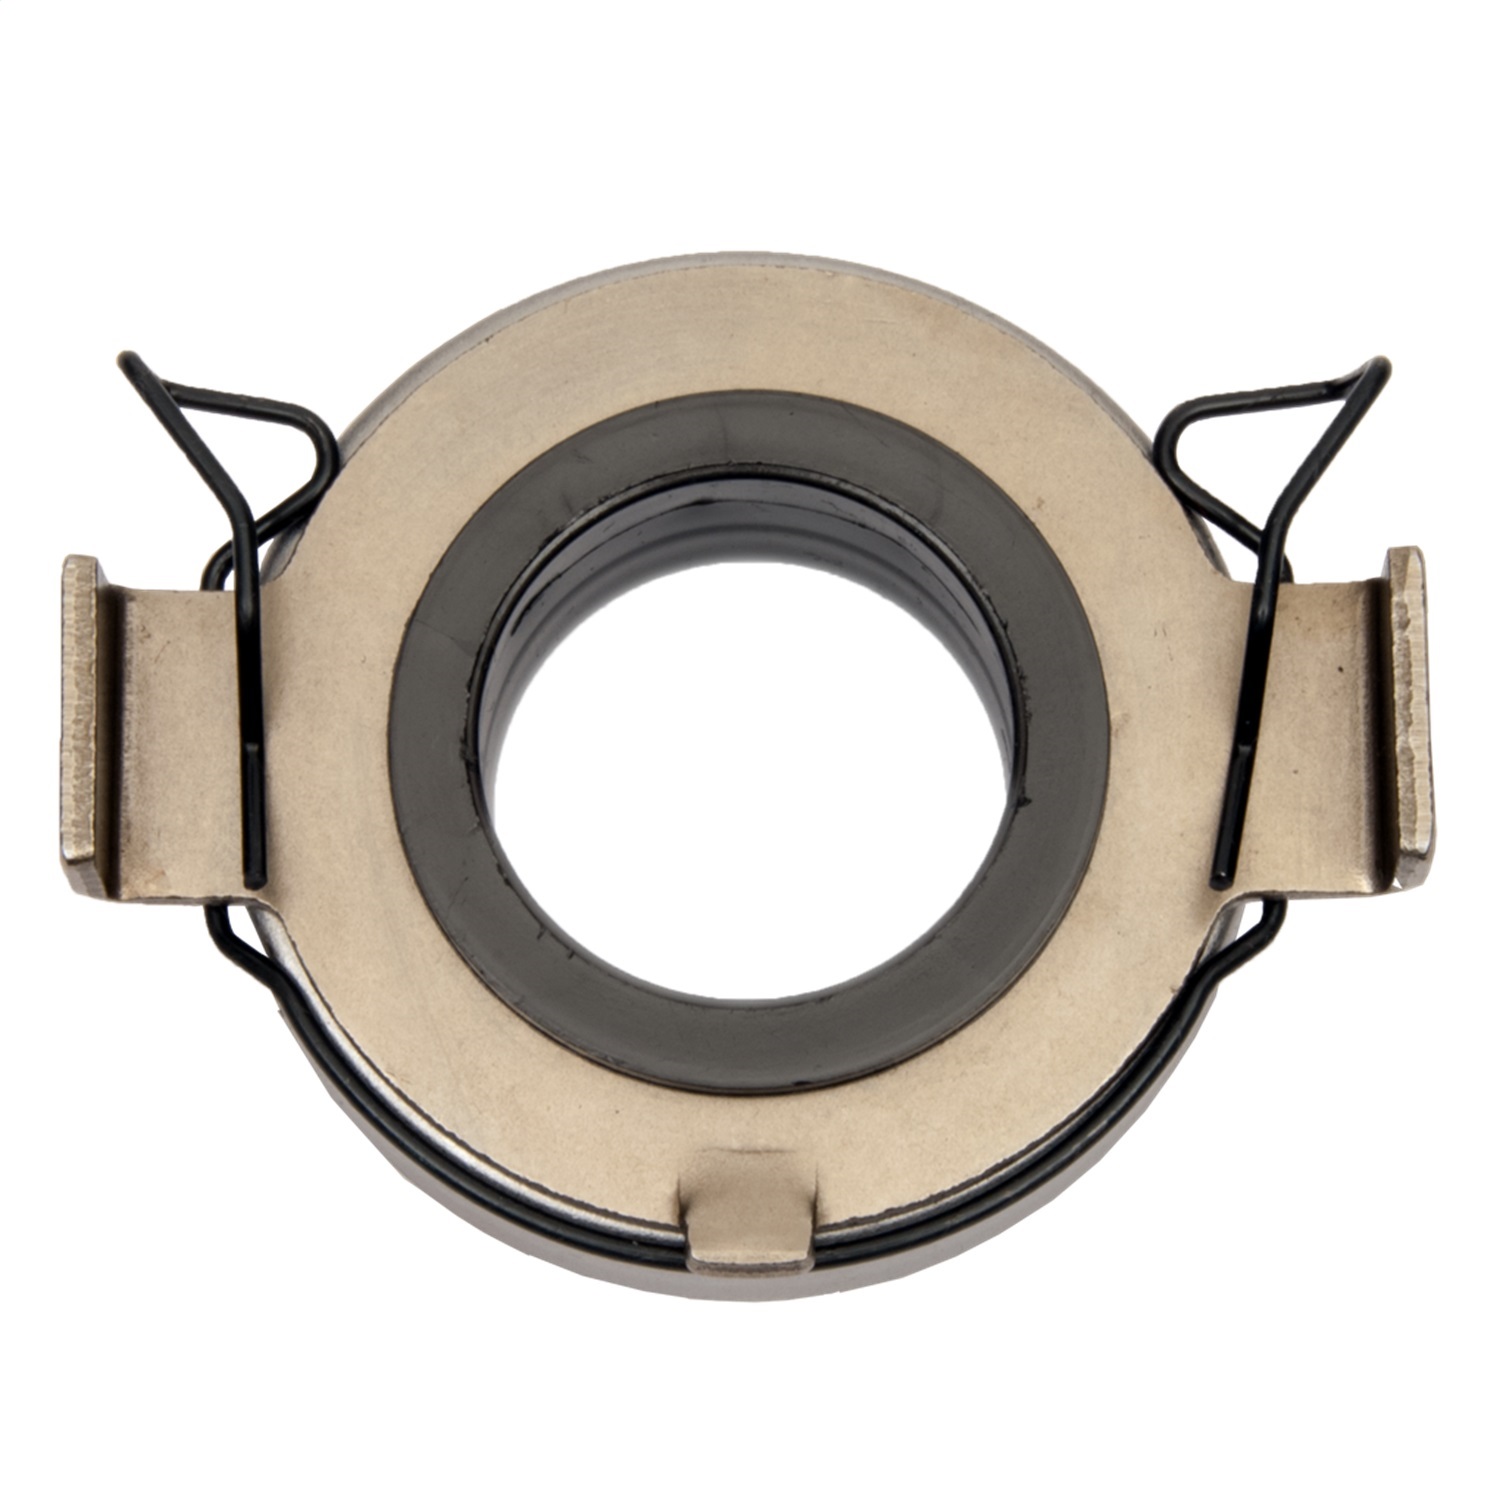 Centerforce Centerforce 840 Throwout Bearing